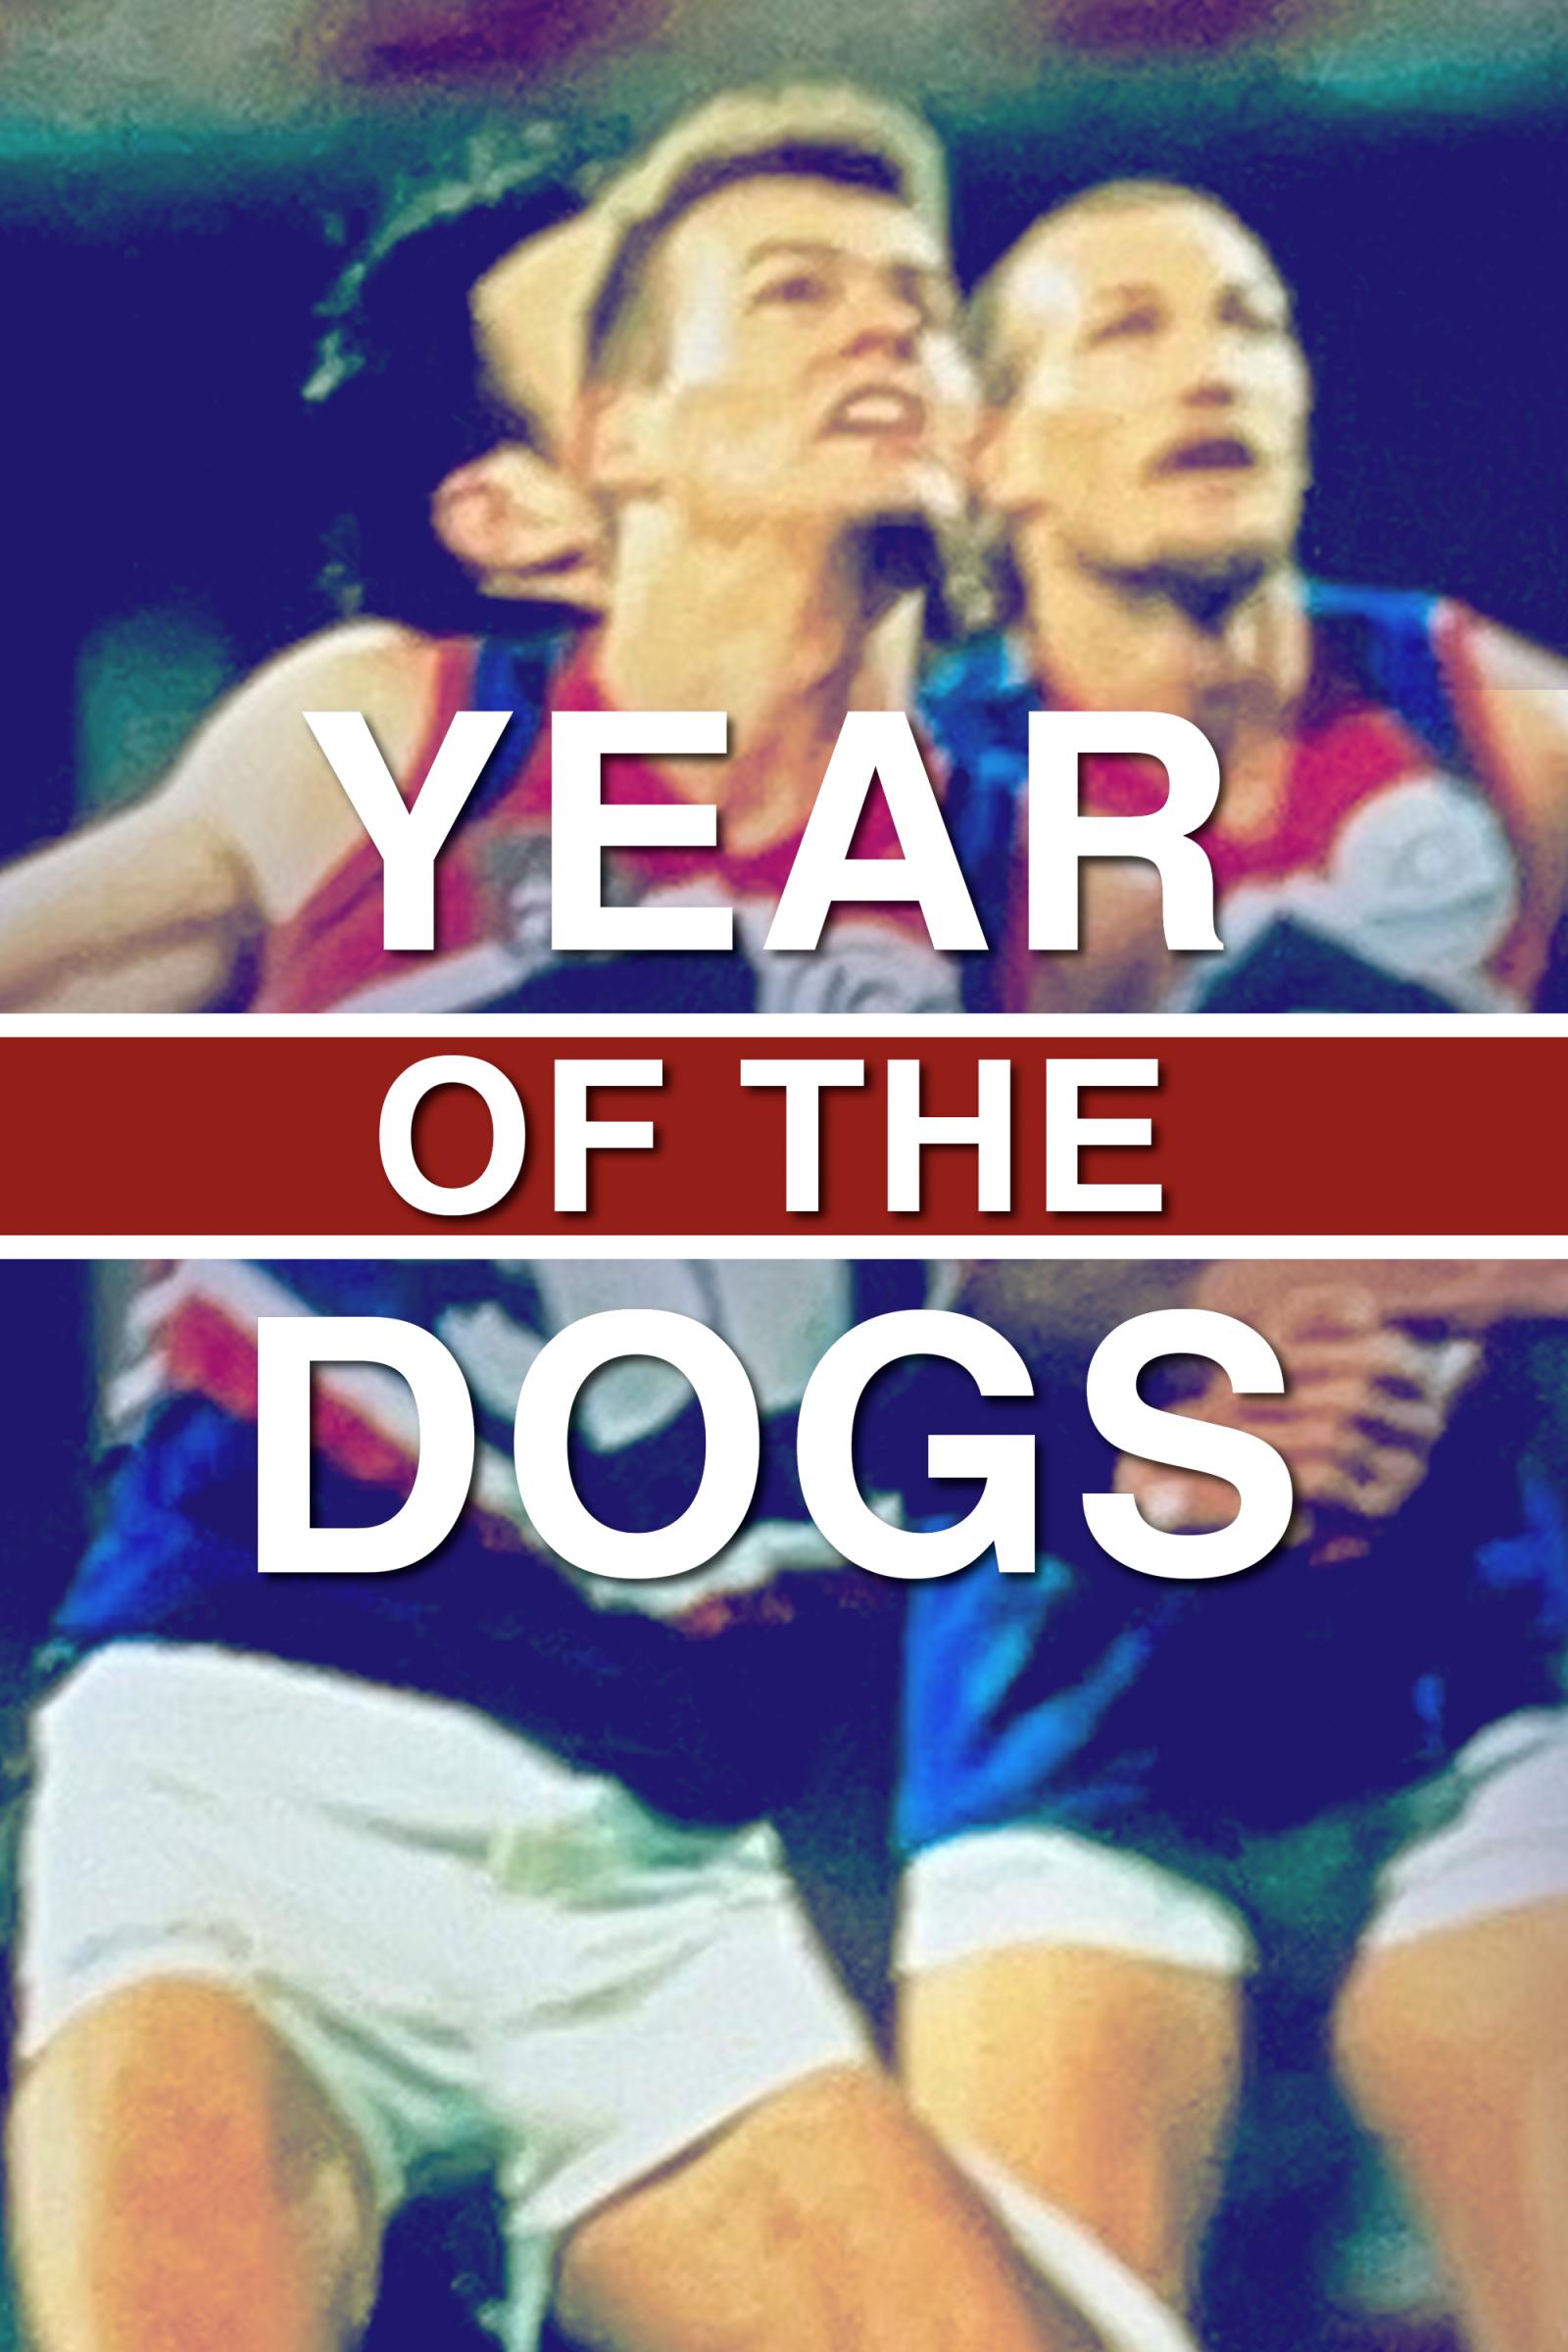 Where to stream Year of the Dogs